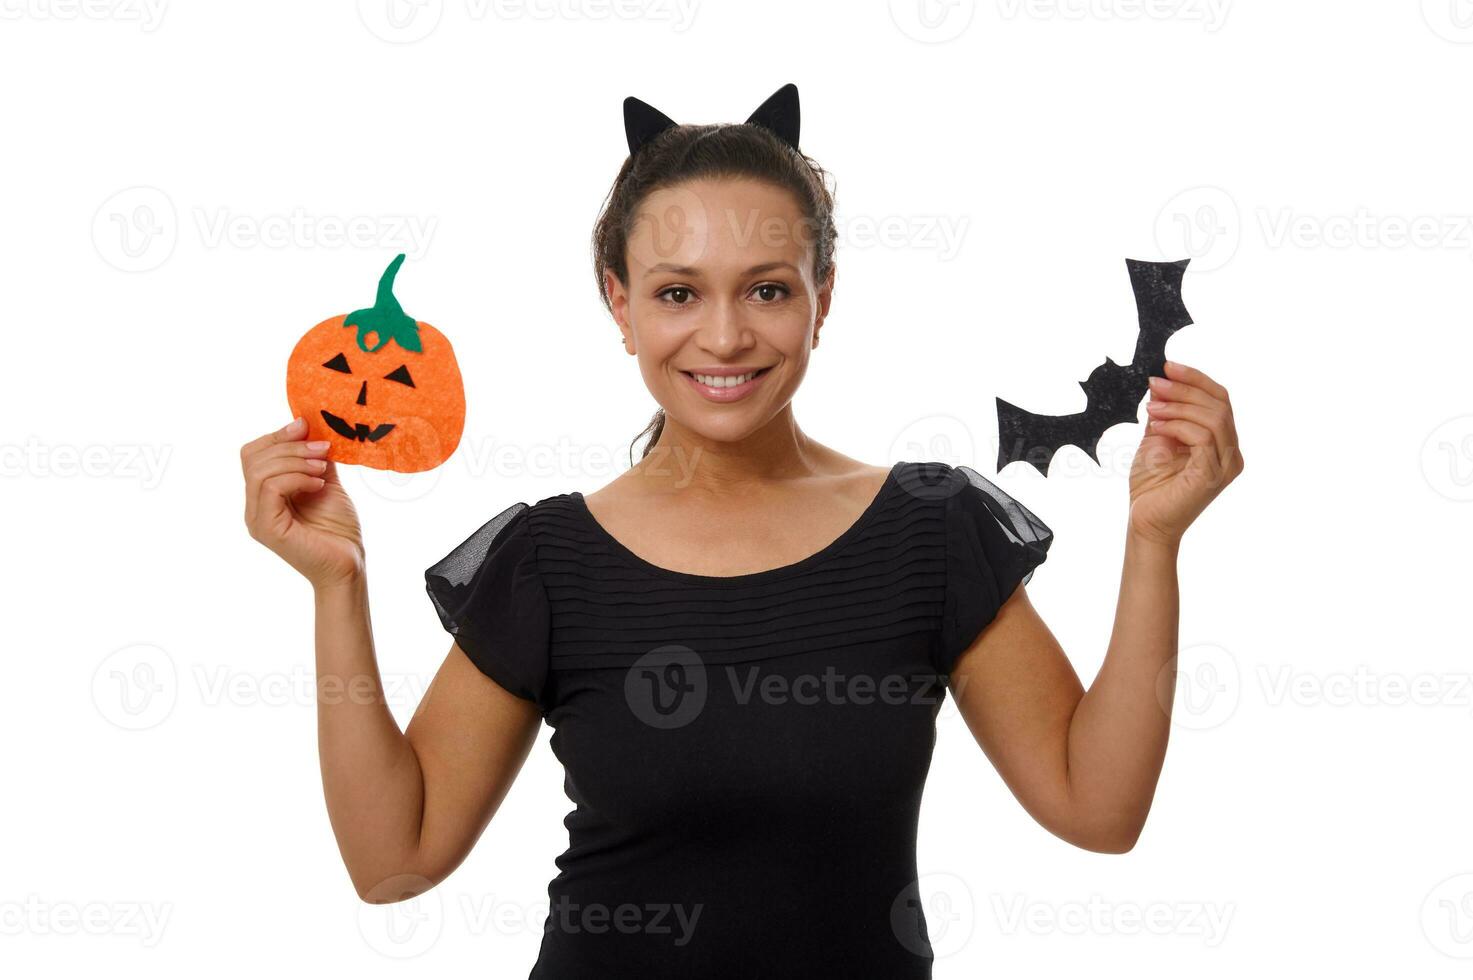 Beautiful woman in cat ears hoop and smiling with cute toothy smile poses against white background with cut felt handmade pumpkin and bat, celebrating Halloween traditional event. Copy space for ad photo